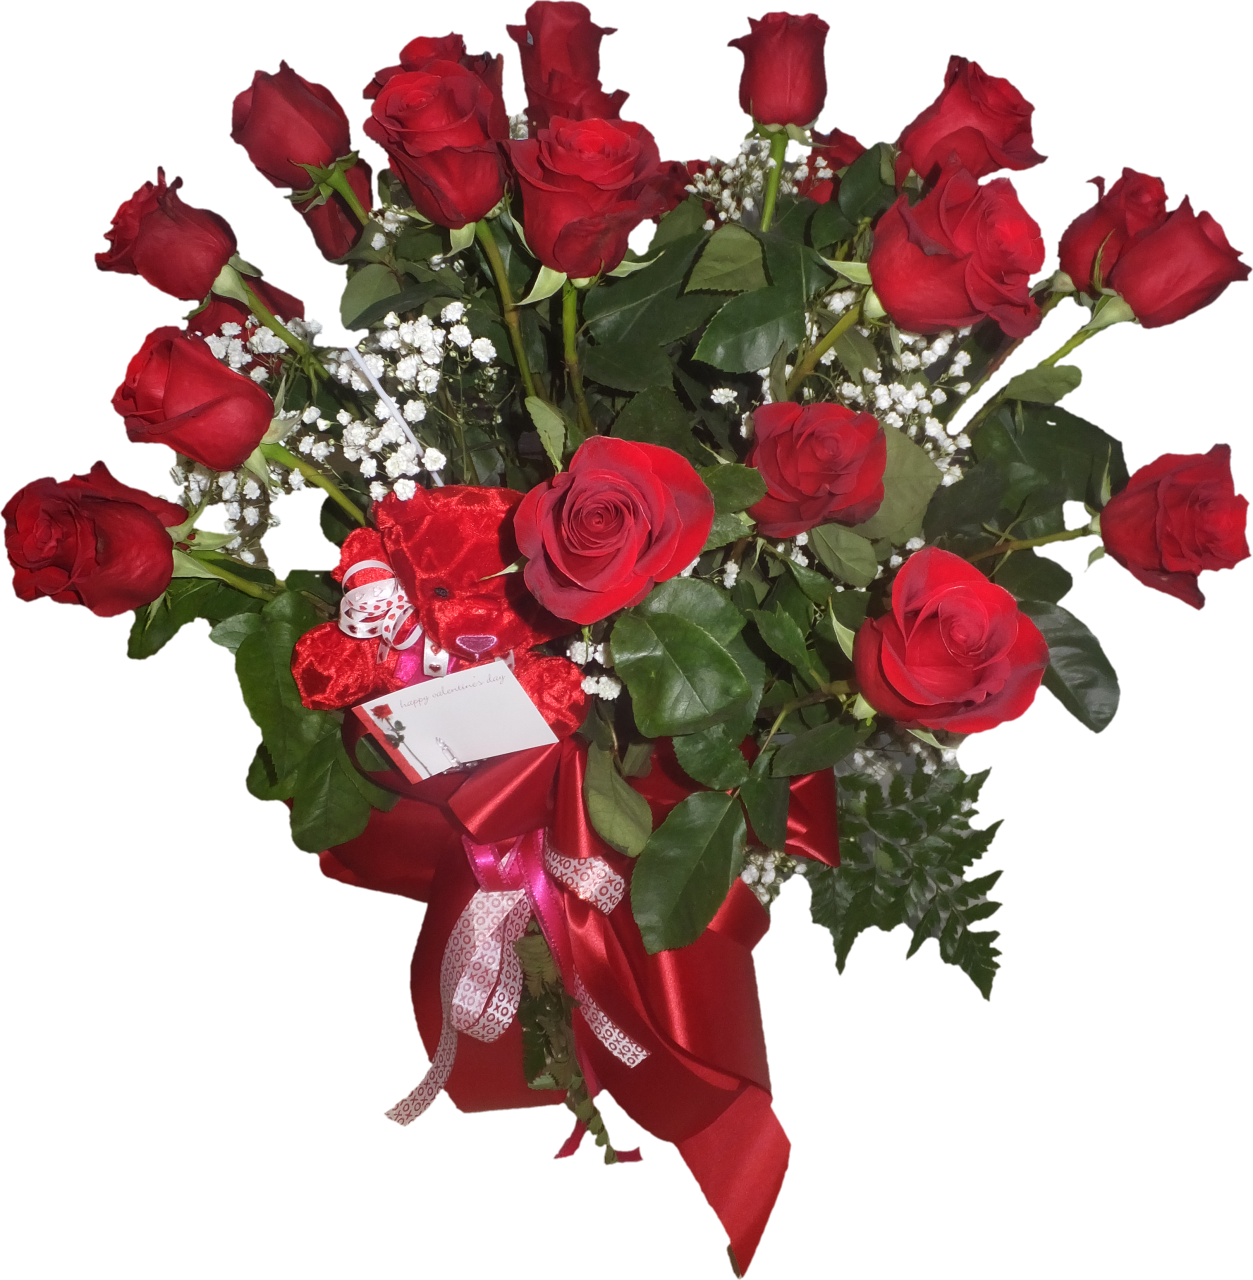 2 Dozen Red Roses In A Vase - Beautiful Red Rose Flower (1253x1280)